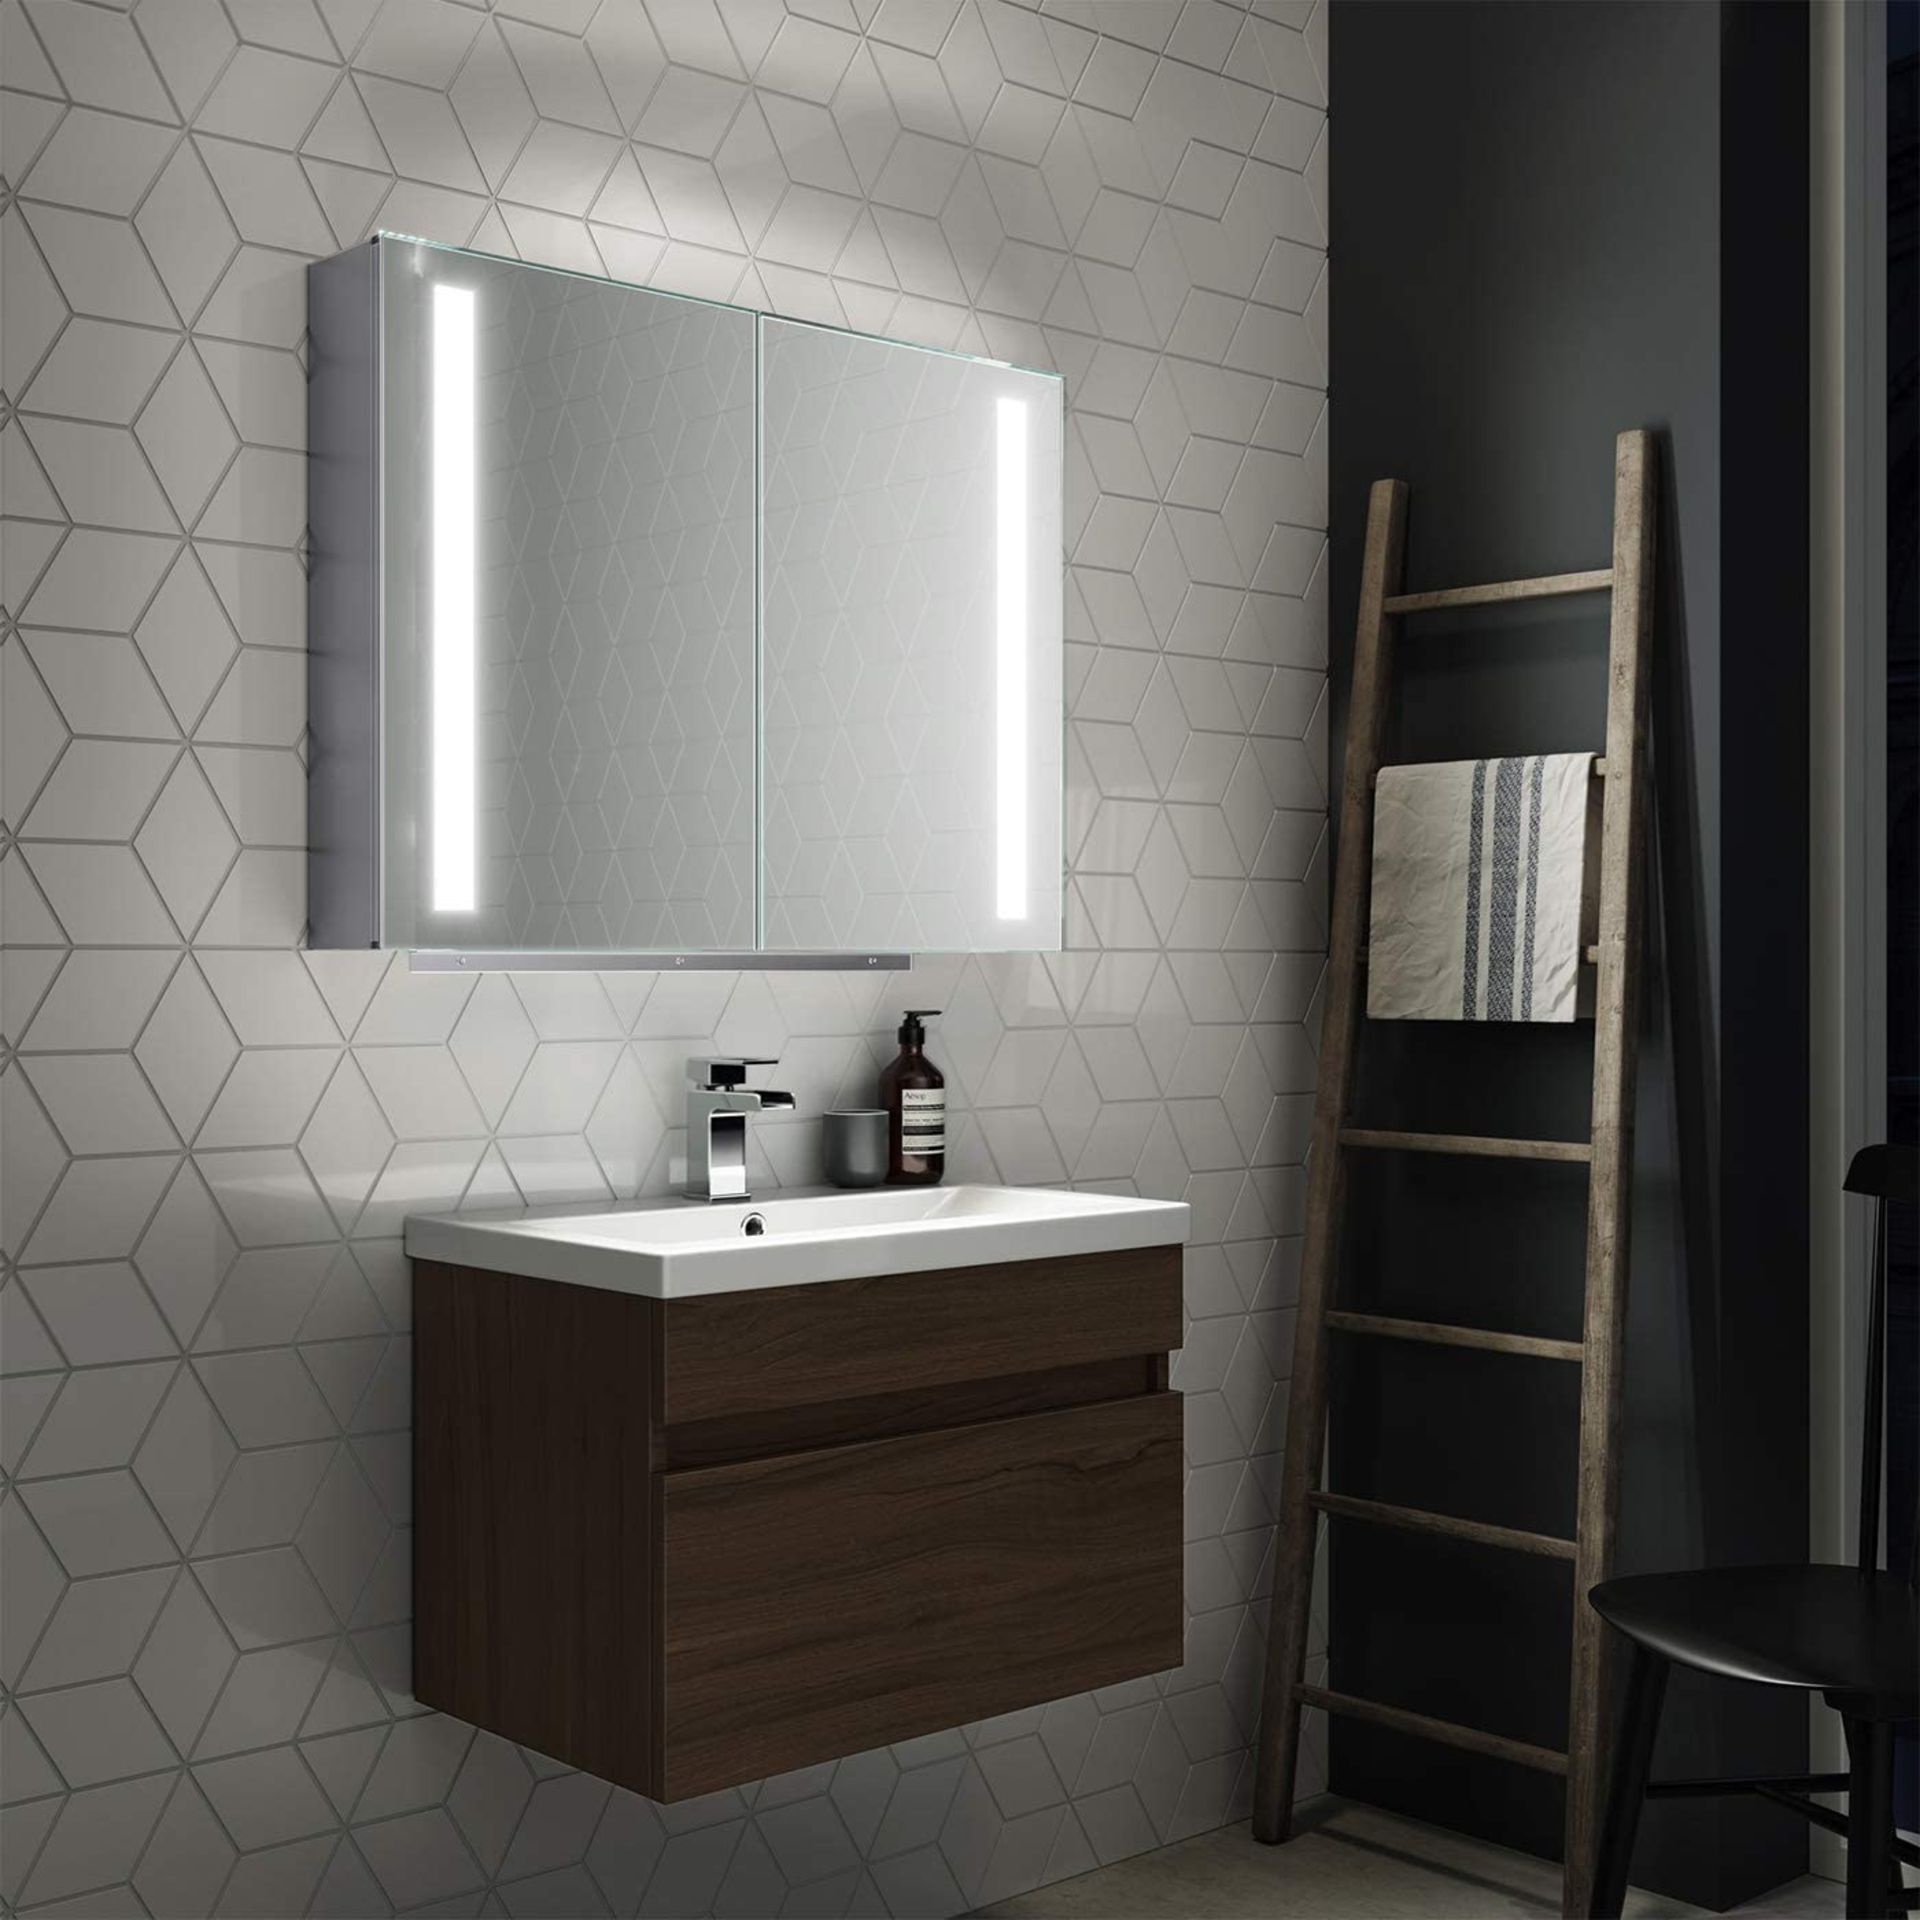 NEW 800x600 Dawn Illuminated LED Mirror Cabinet. RRP £939.99.MC164.We love this mirror cabinet... - Image 3 of 3